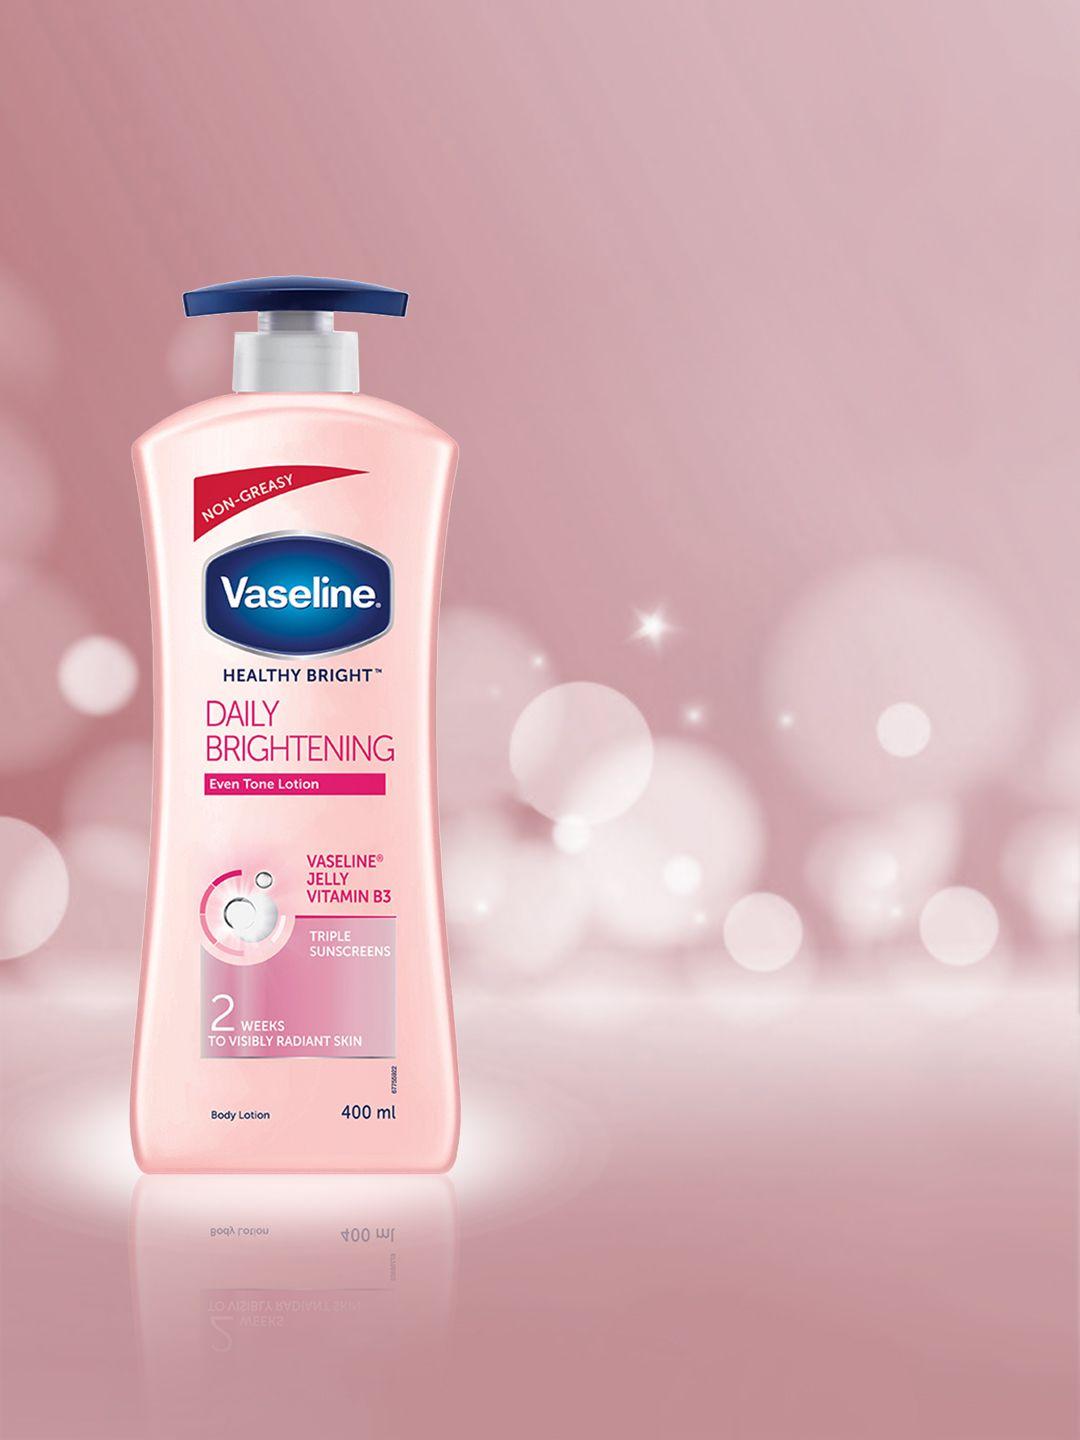 Vaseline Unisex Healthy Bright Daily Brightening Body Lotion with Mineral Oil 400 ml